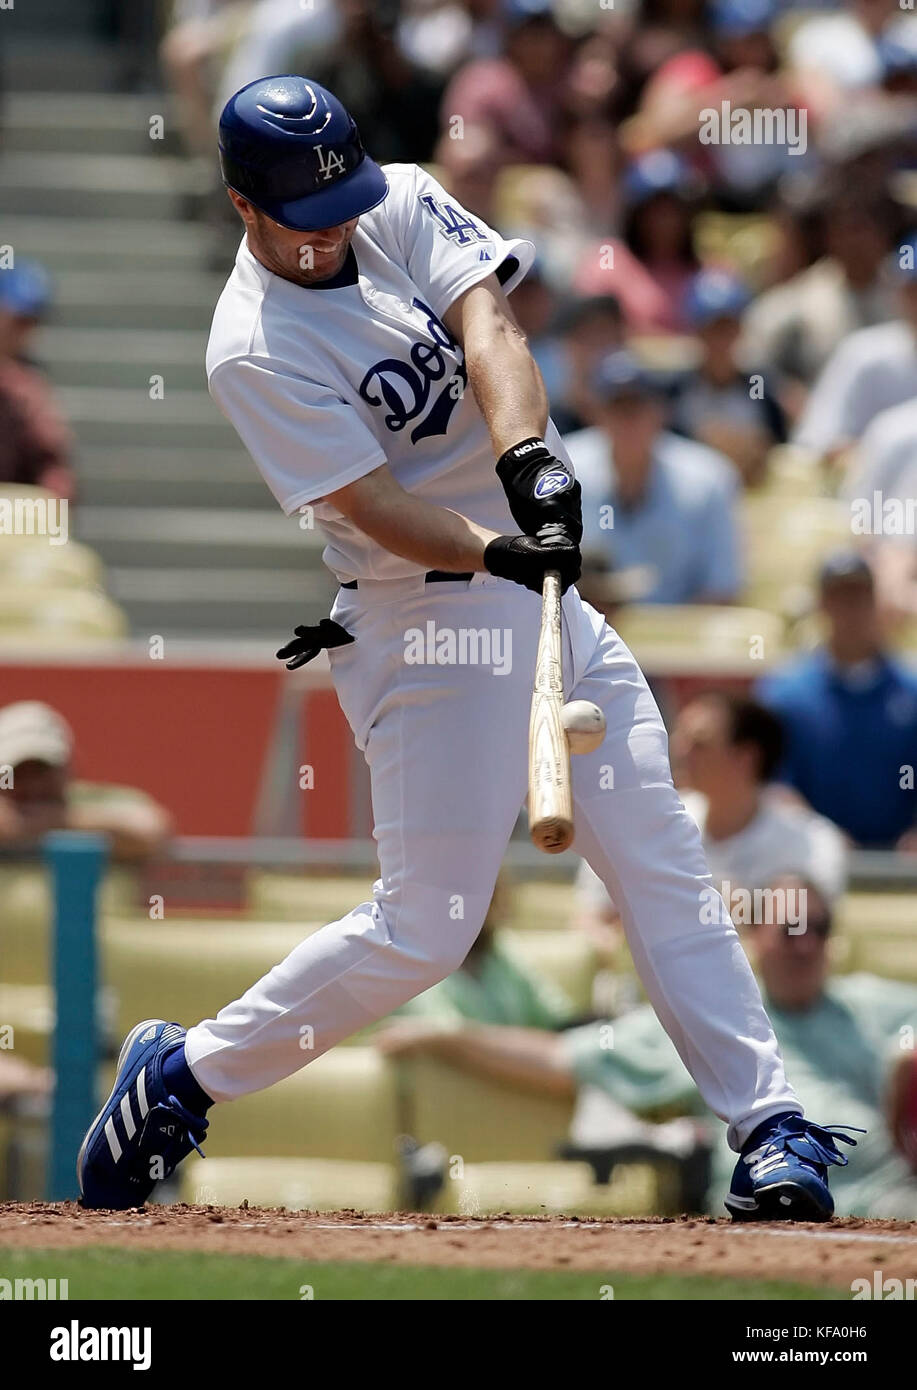 Los Angeles Dodgers' Jeff Kent hits an RBI-double off Milwaukee Brewers  pitcher Dave Bush in the third inning of a baseball game in Los Angeles on  Sunday, May 7, 2006. Photo by